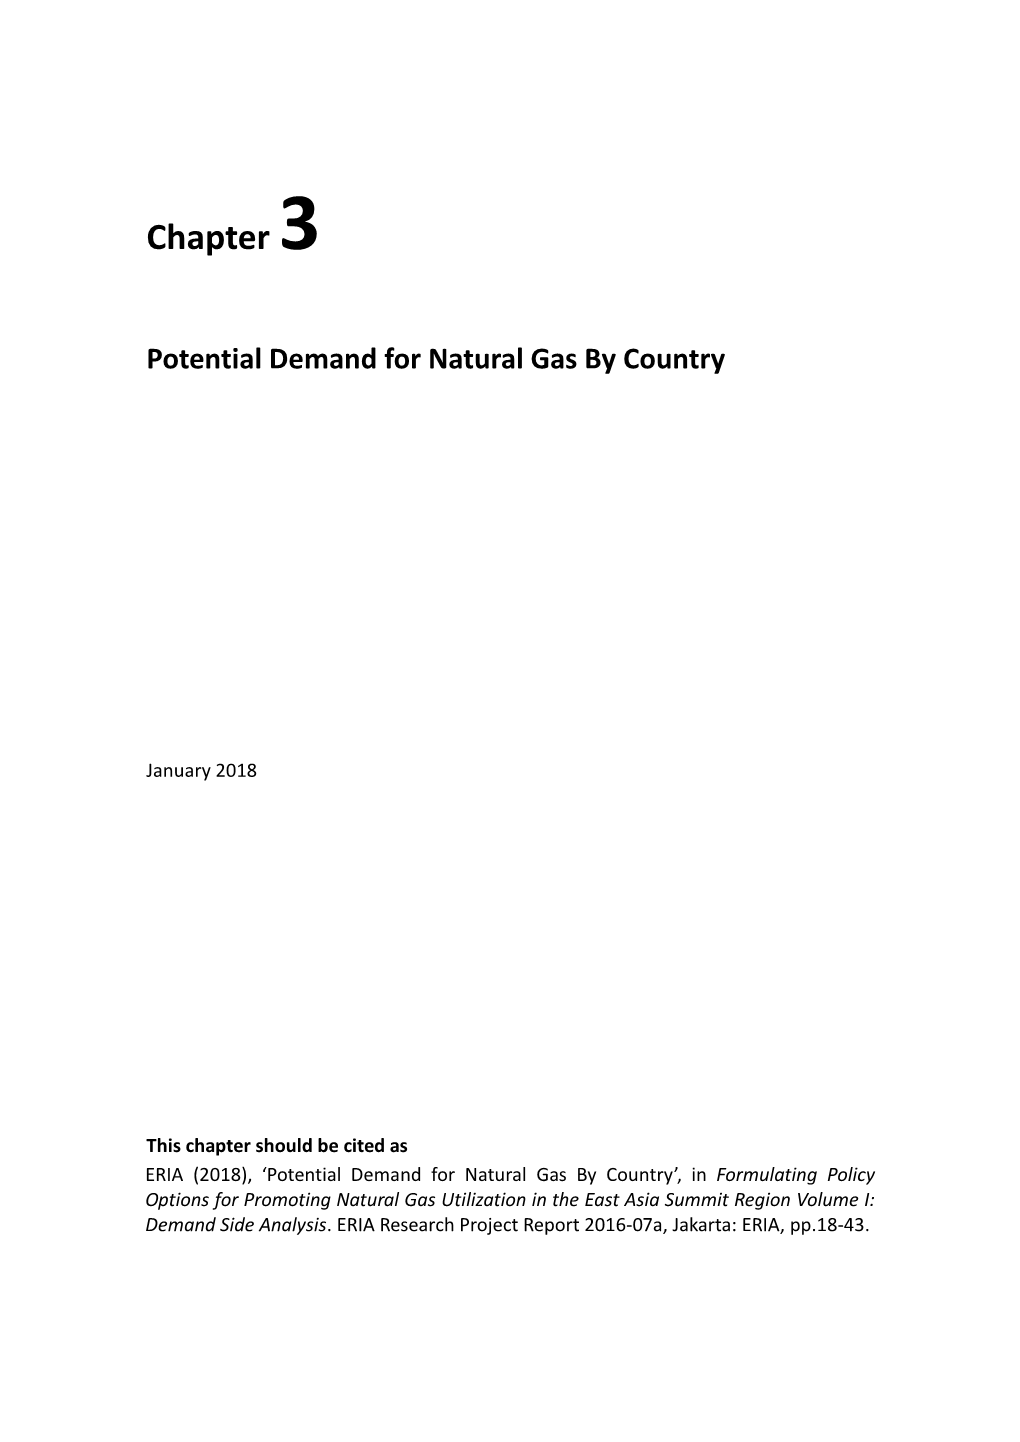 Chapter 3. Potential Demand for Natural Gas by Country